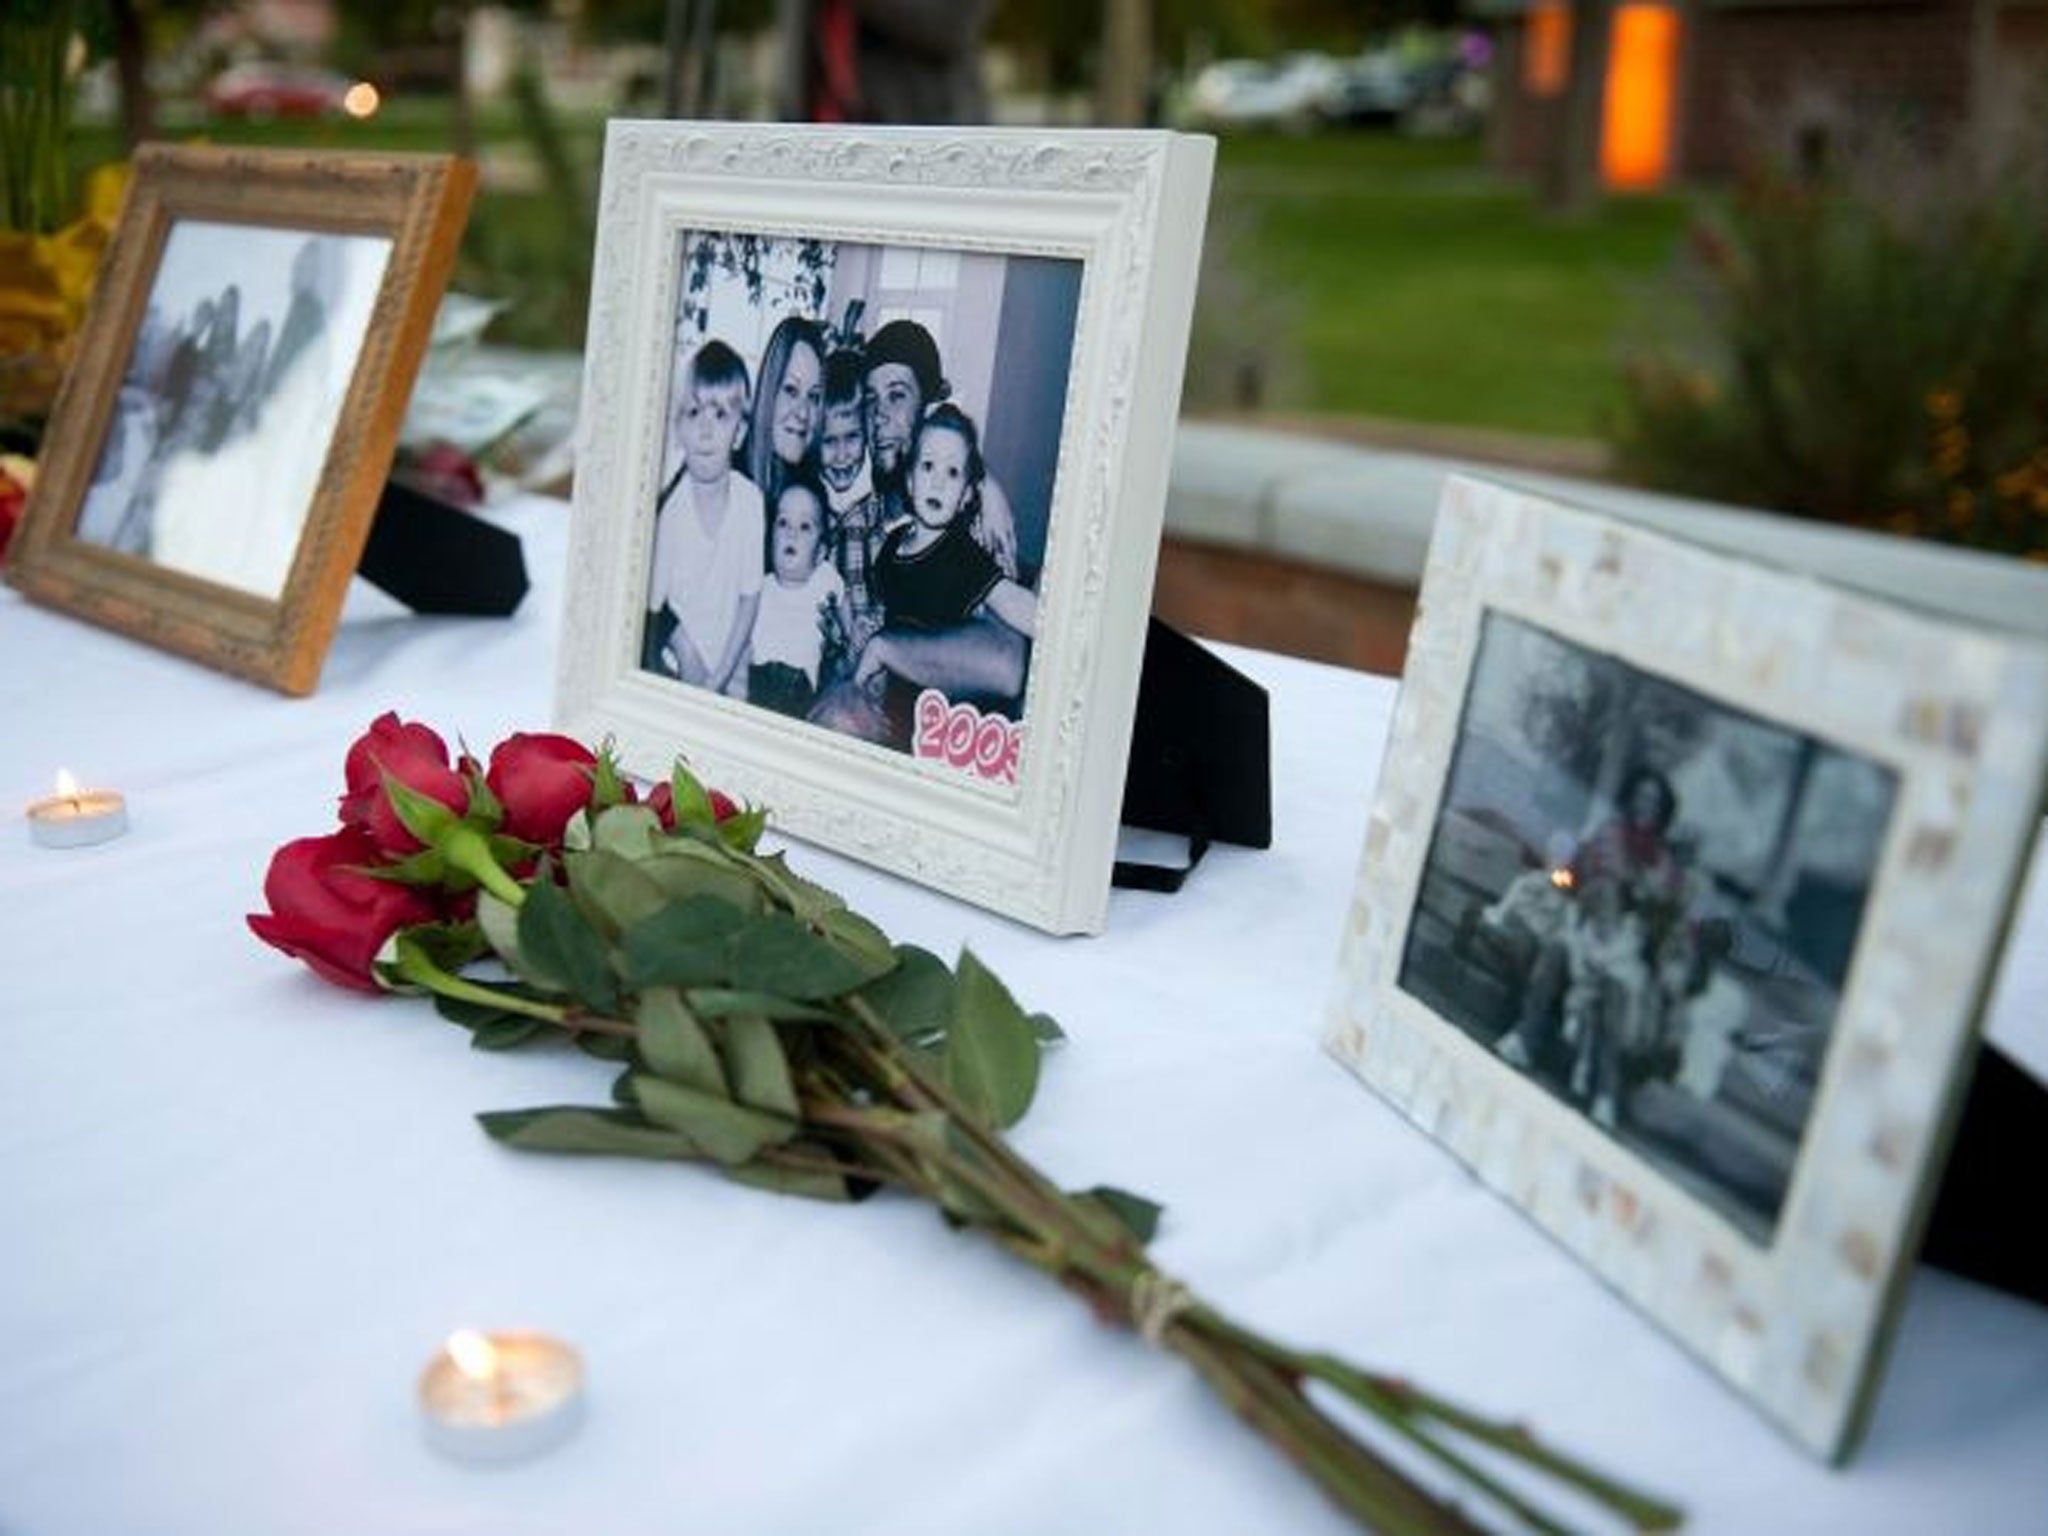 Flowers and photos are on display during a vigil for the Strack family at Pioneer Park in Provo, Utah.